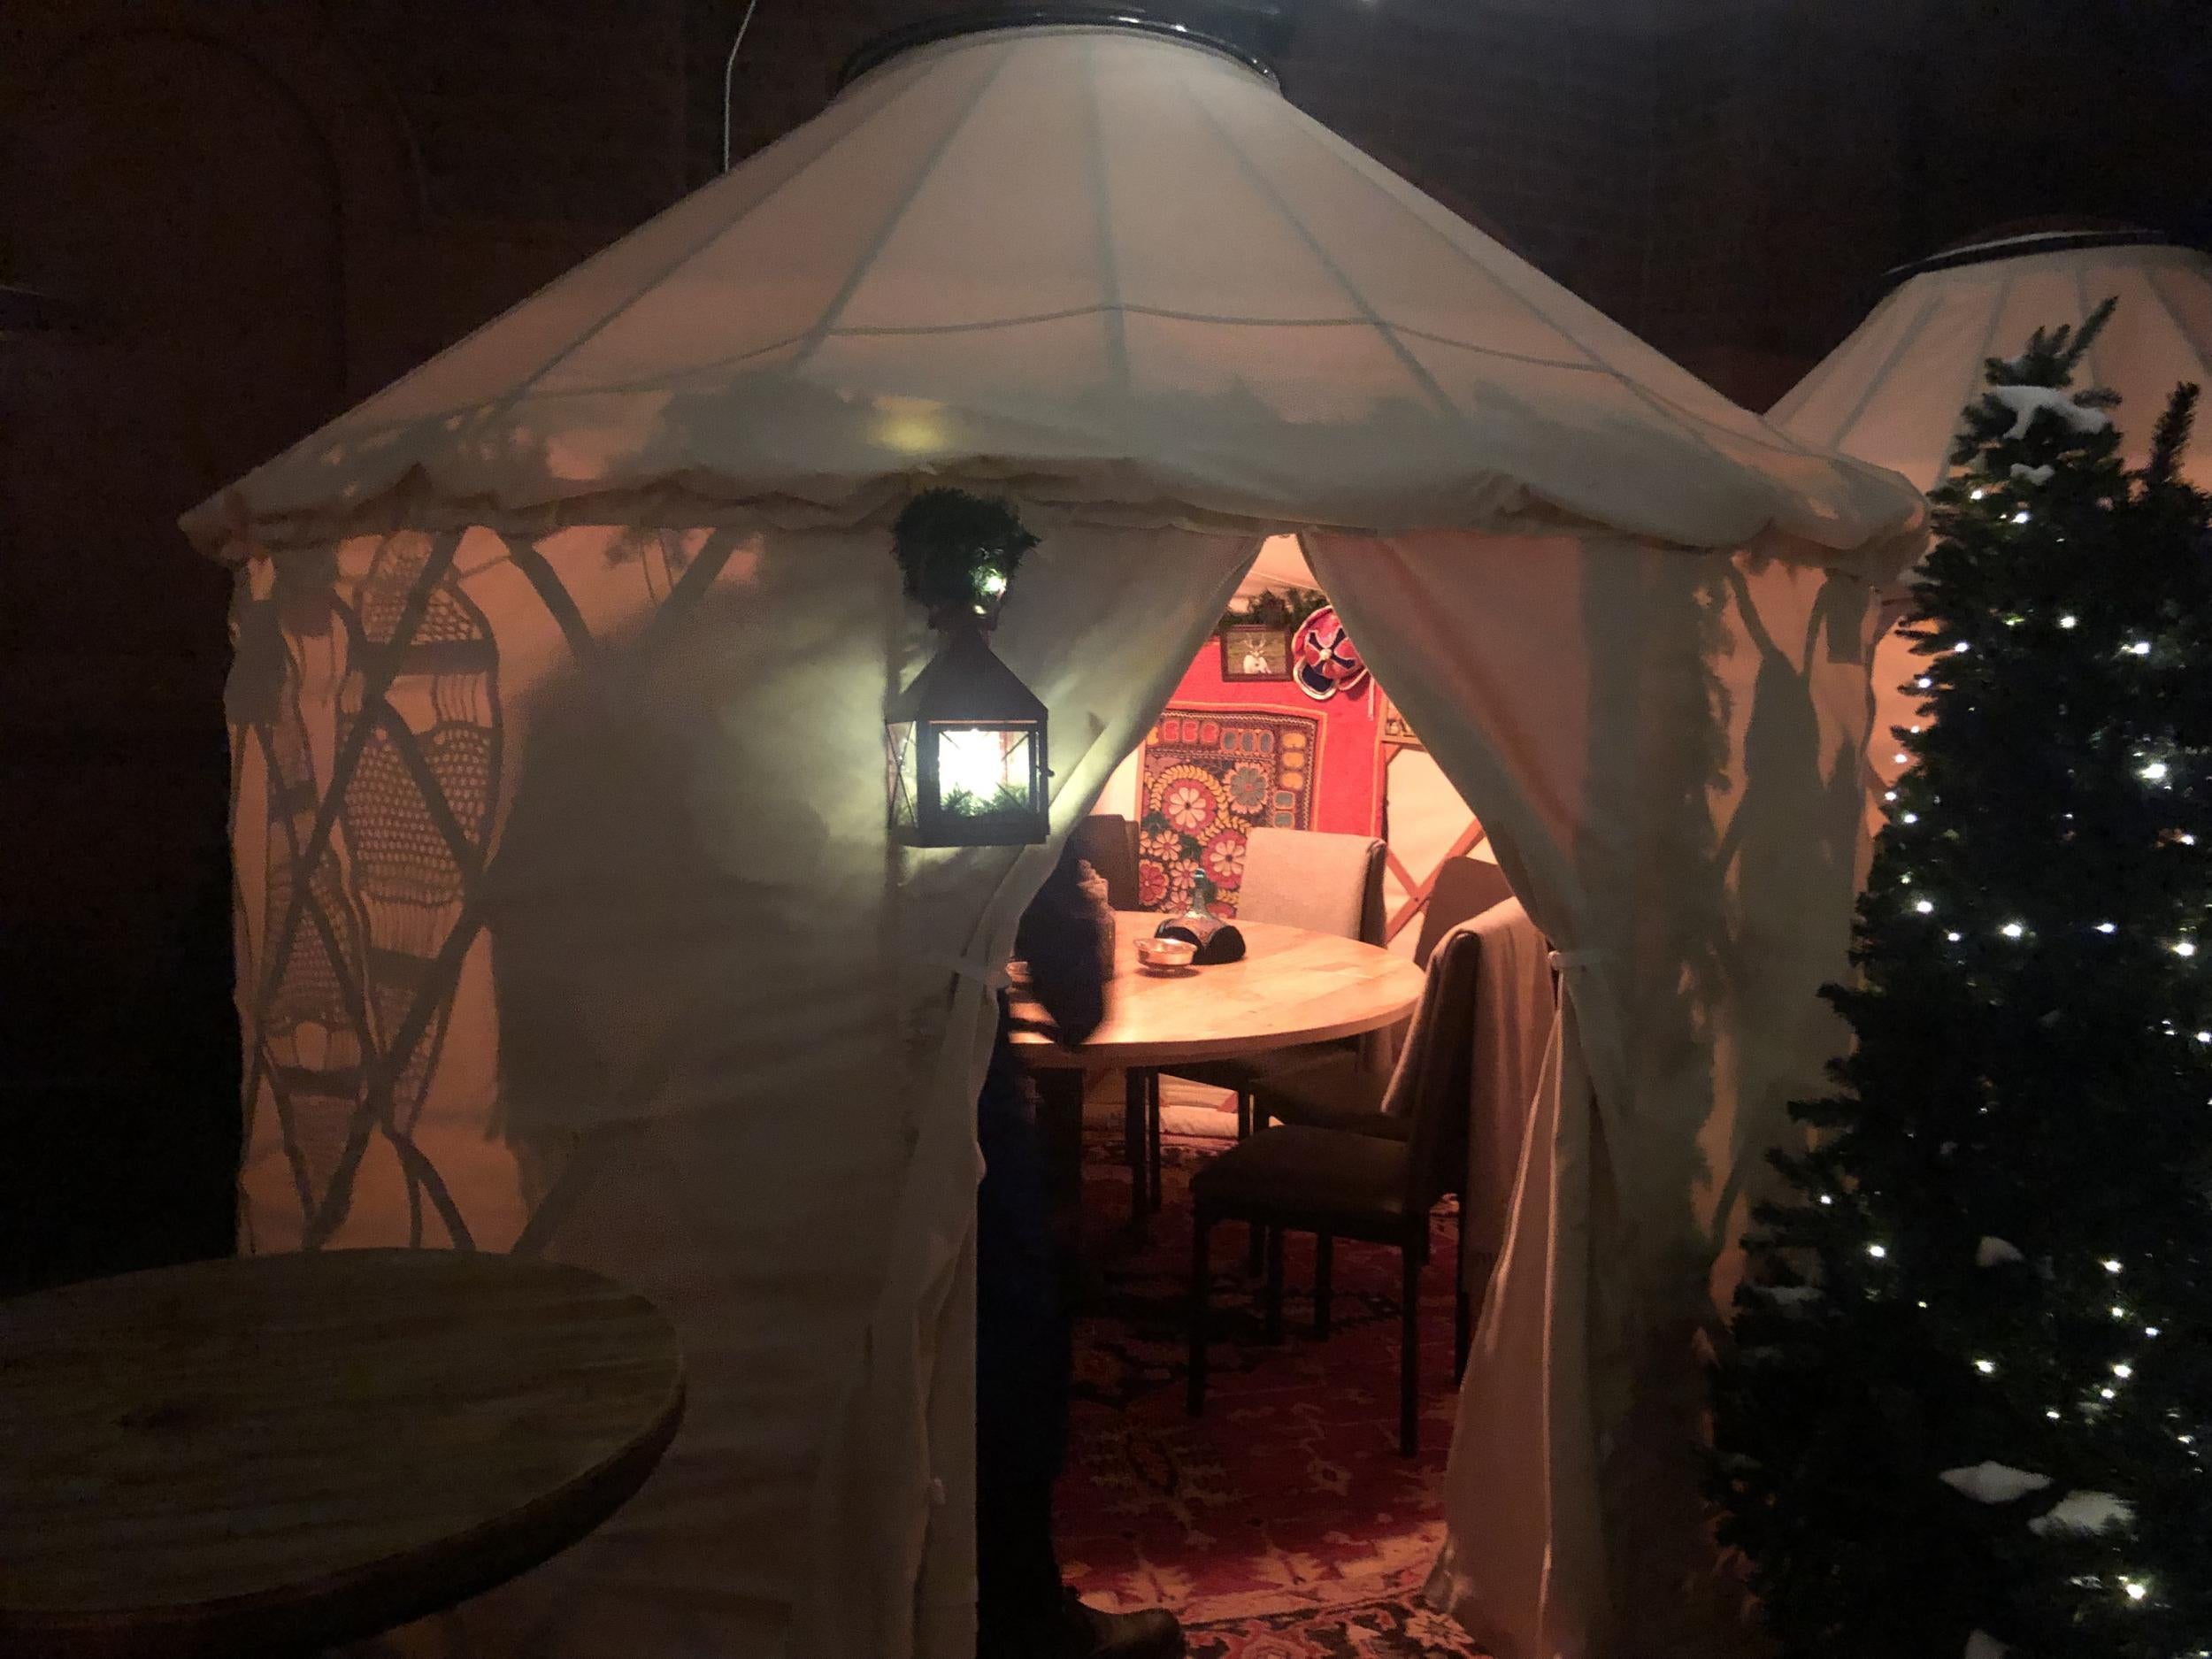 The yurts are all decorated differently